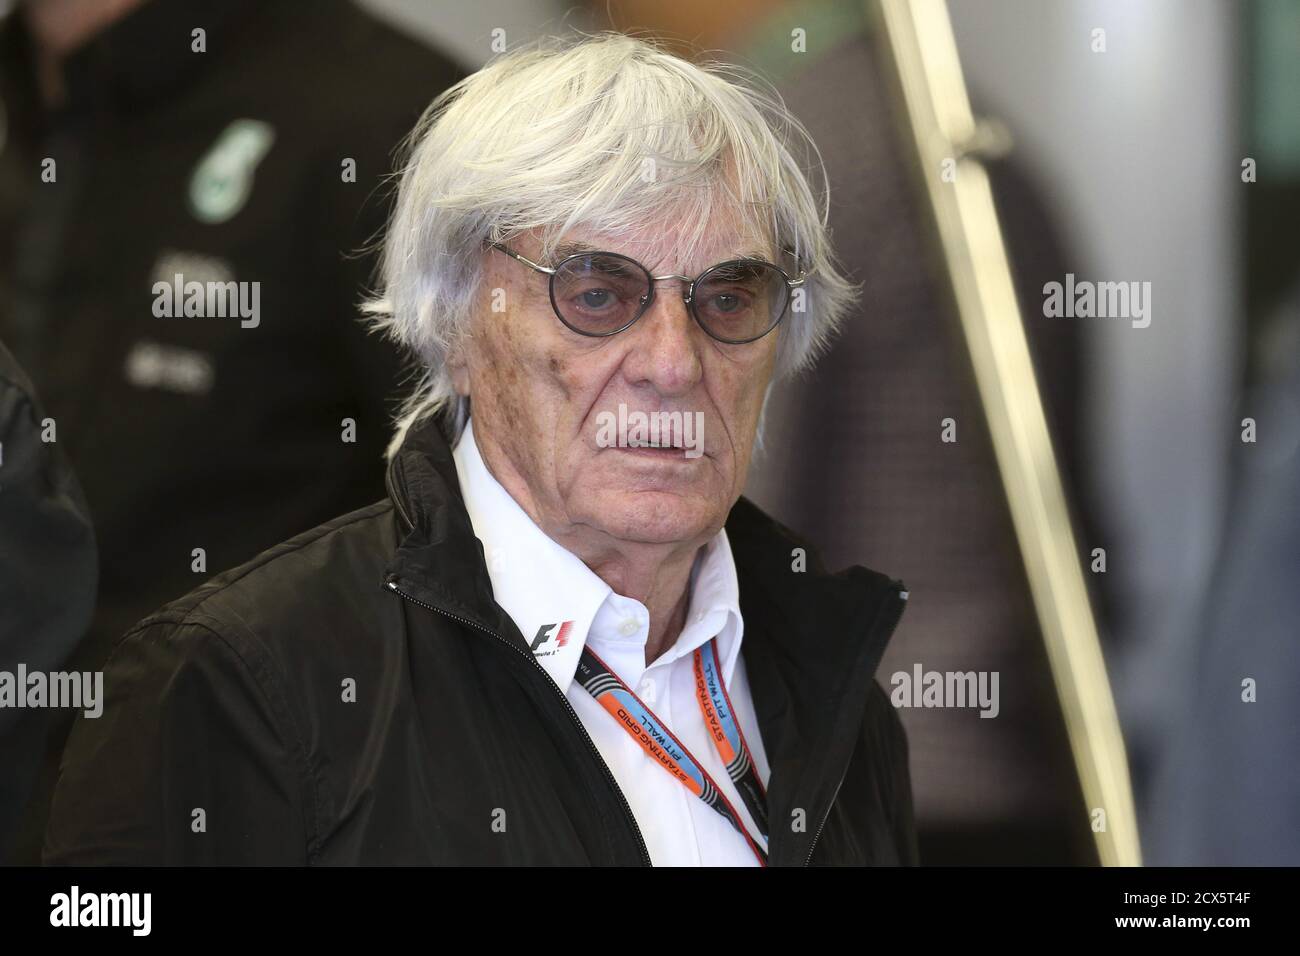 Formula One supremo Bernie Ecclestone walks in the Mercedes team garage during the third practice session of the Canadian F1 Grand Prix at the Circuit Gilles Villeneuve in Montreal June 6, 2015. REUTERS/Chris Wattie Stock Photo